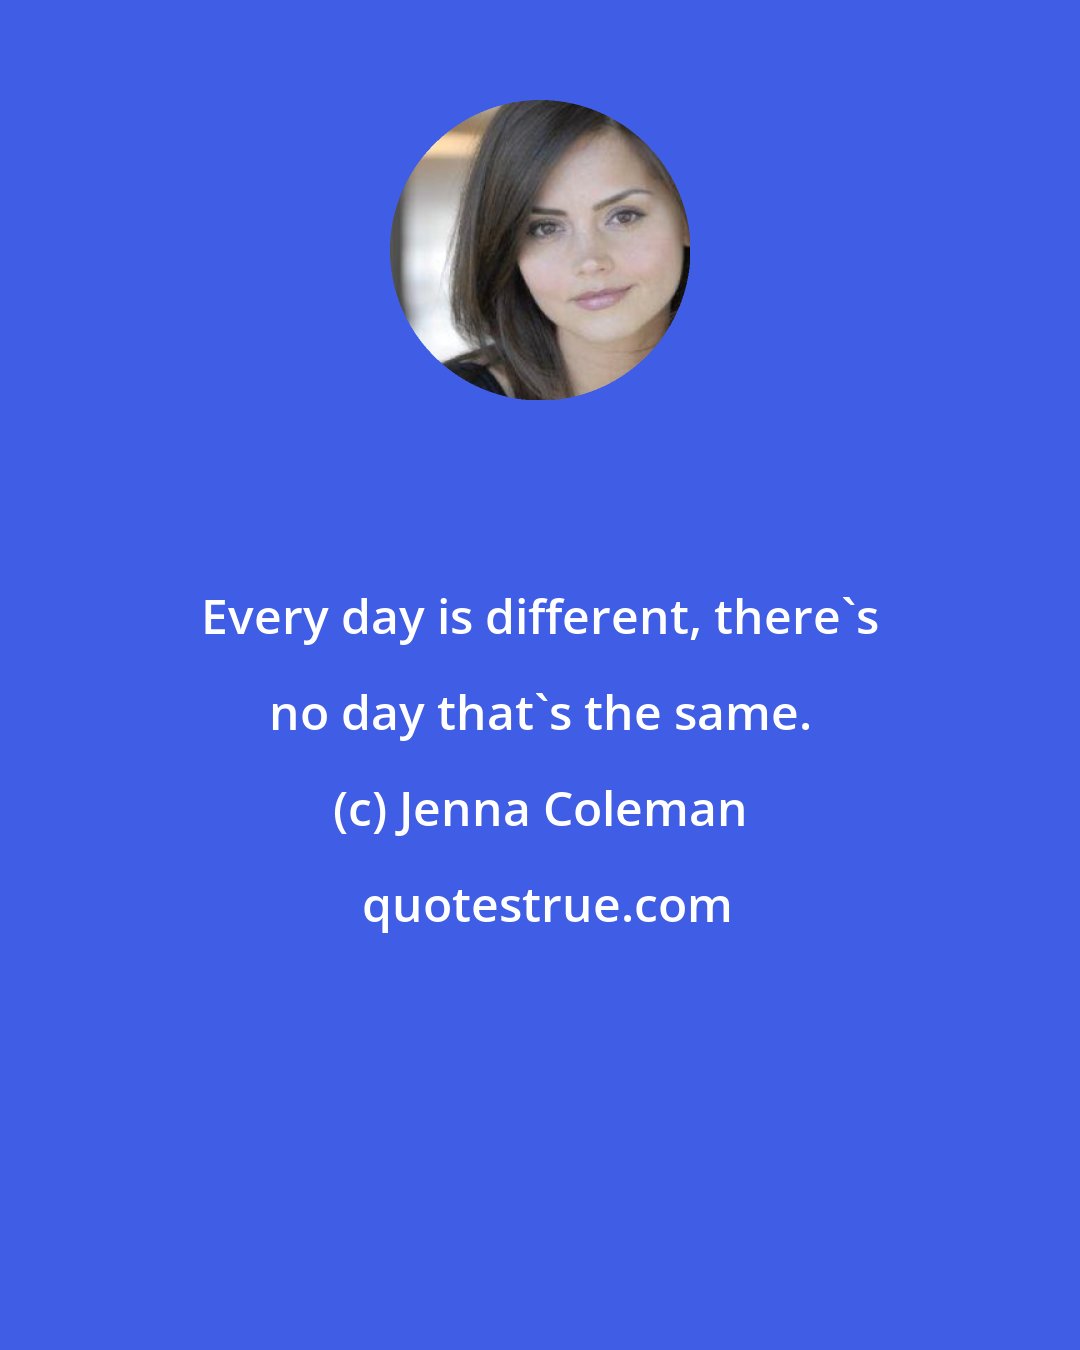 Jenna Coleman: Every day is different, there's no day that's the same.